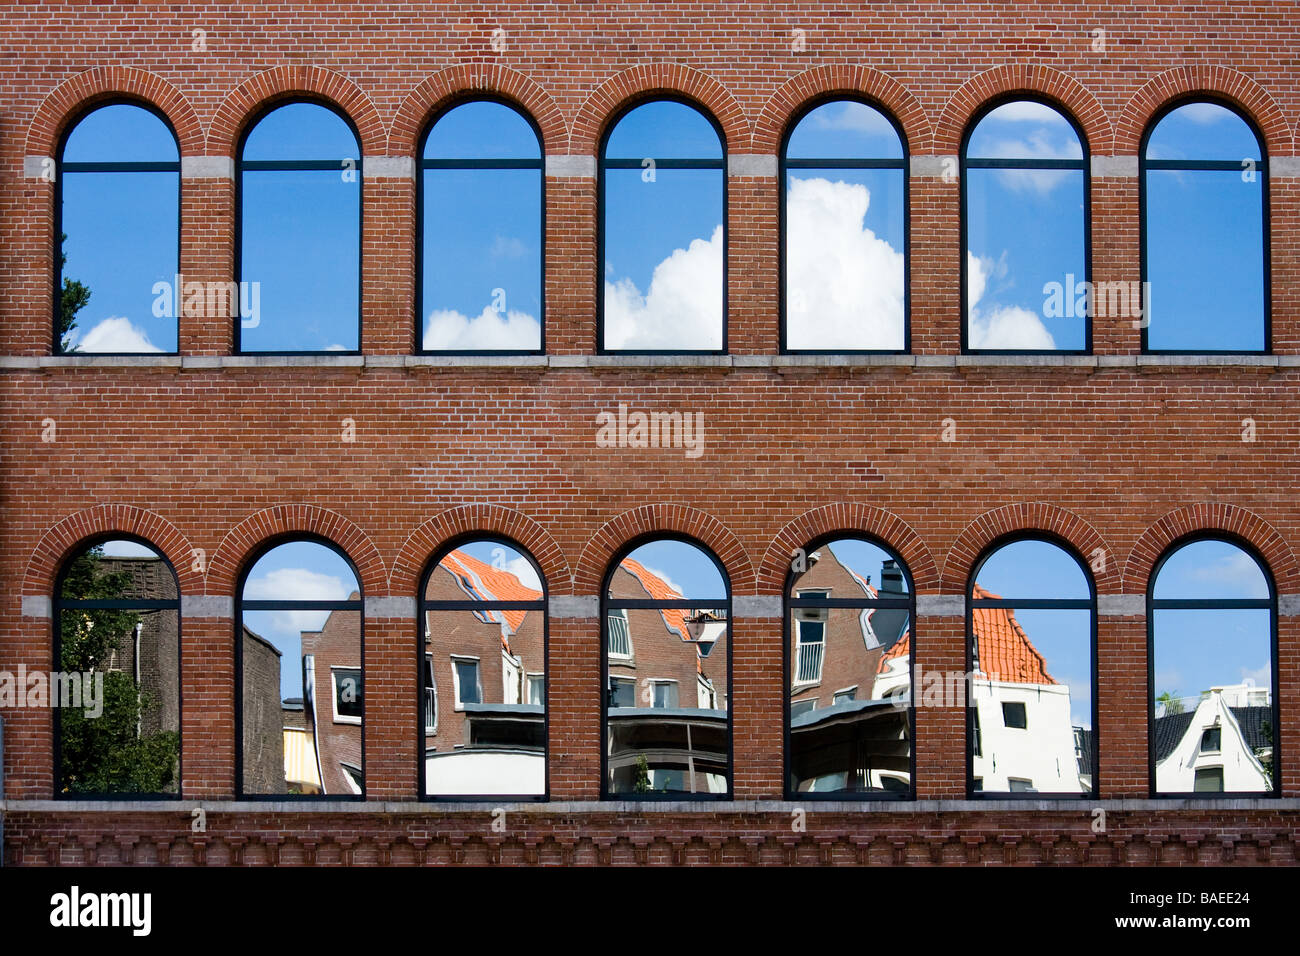 Typical Netherlands houses are reflected in a relatively modern building Shot in Amsterdam Netherlands Stock Photo